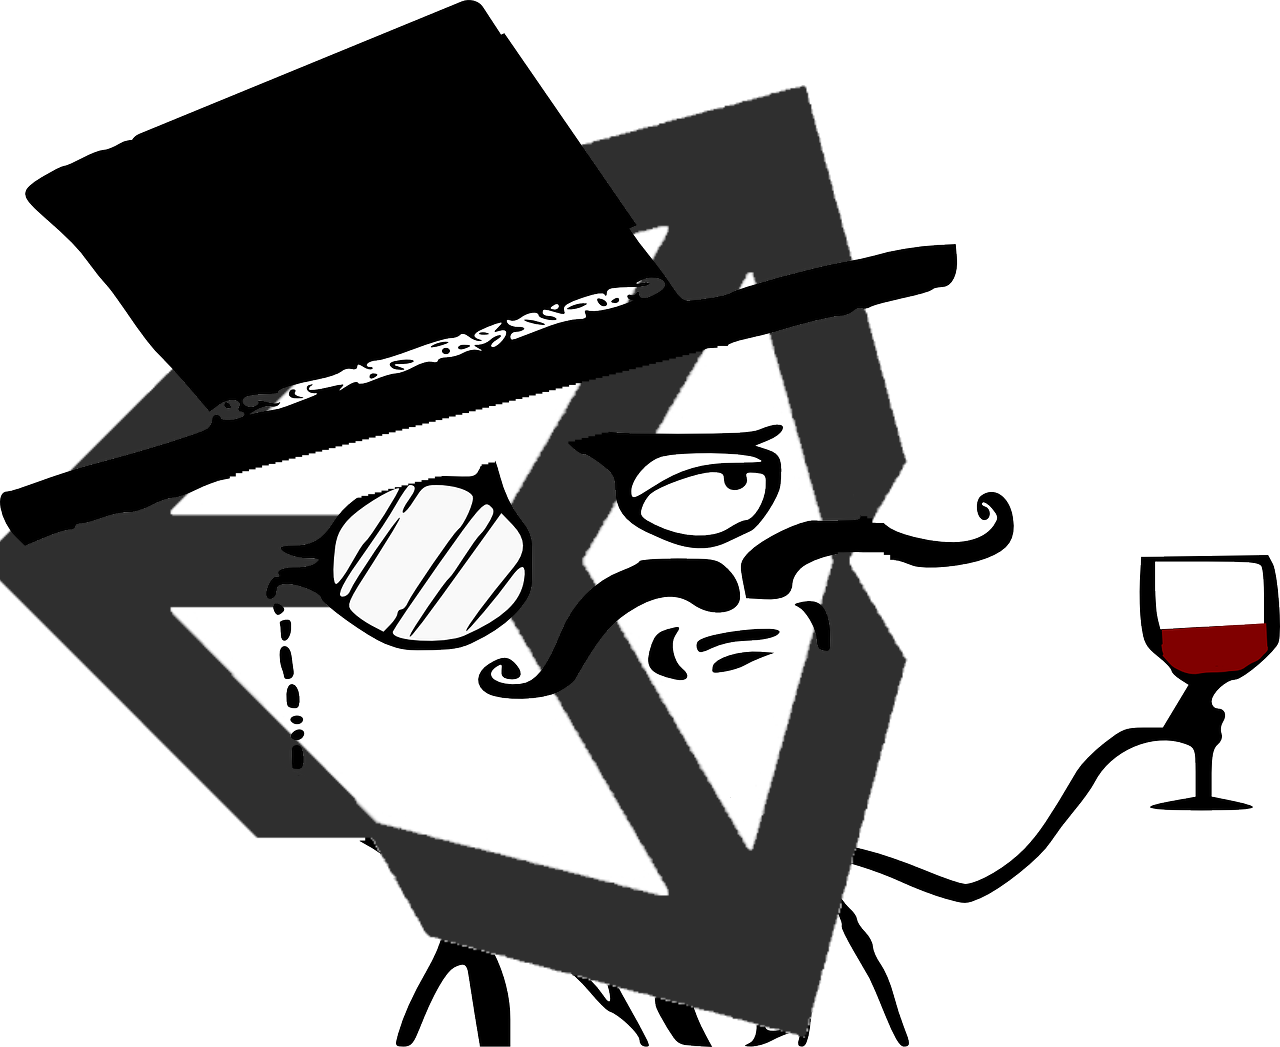 unity logo wearing a top hat and monocle